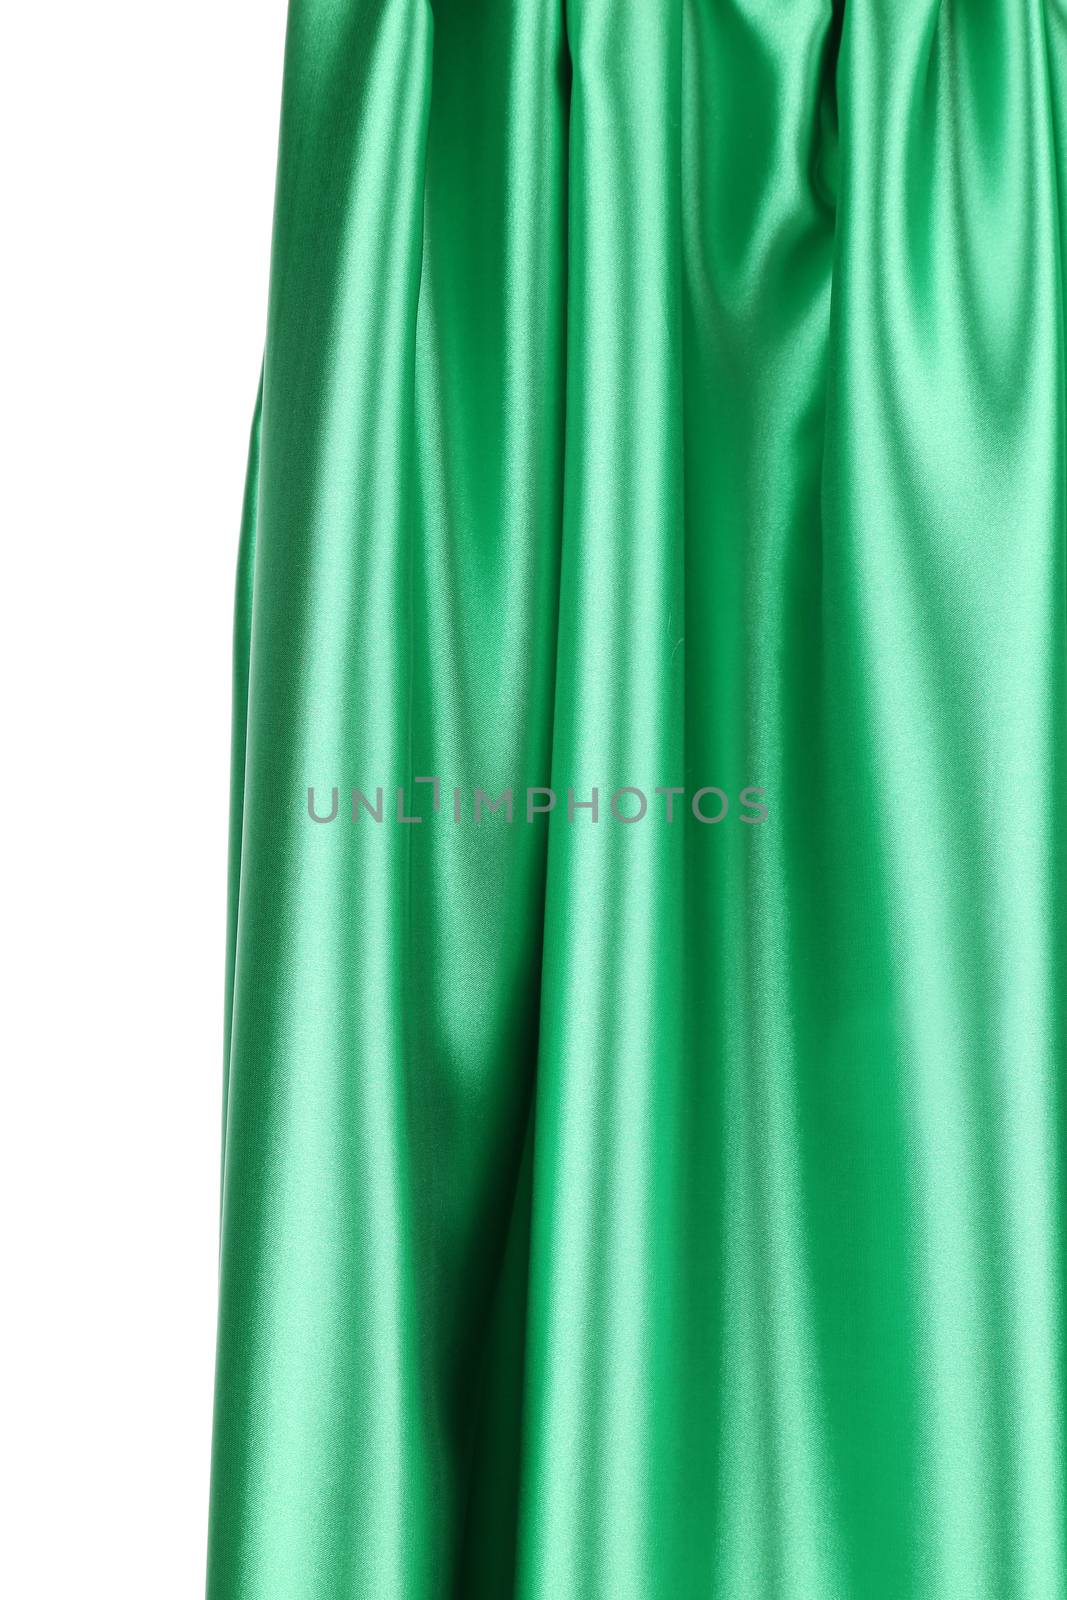 Creases in green fabric. Close up. Whole background.